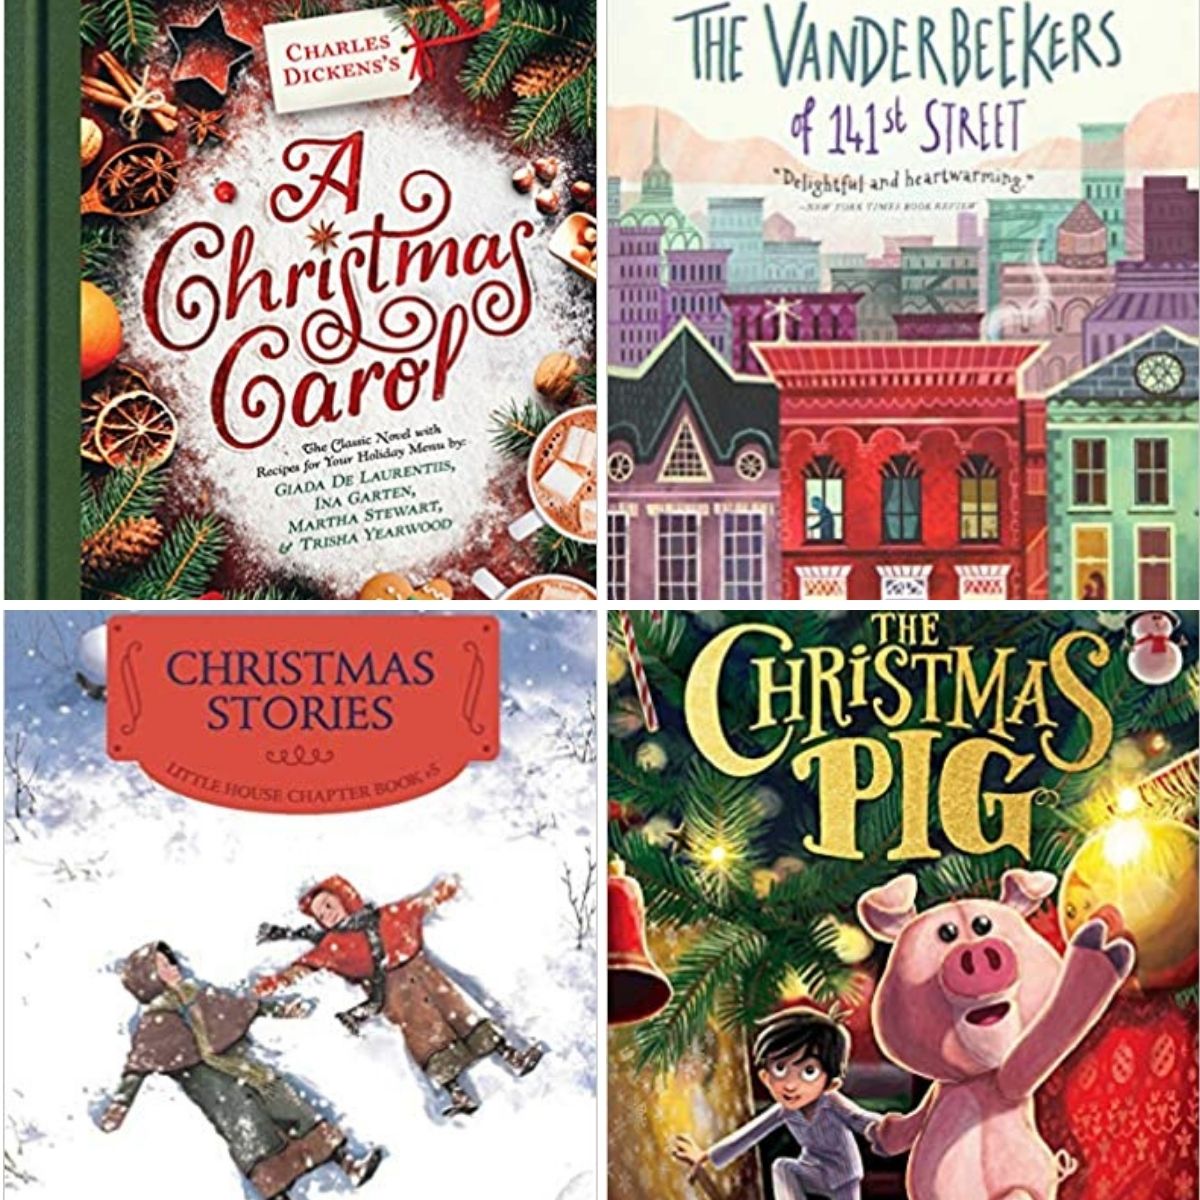 Collage of four book covers: Christmas Stories, The Christmas Pig, The Vanderbeeks of 141st Street, and A Christmas Carol.